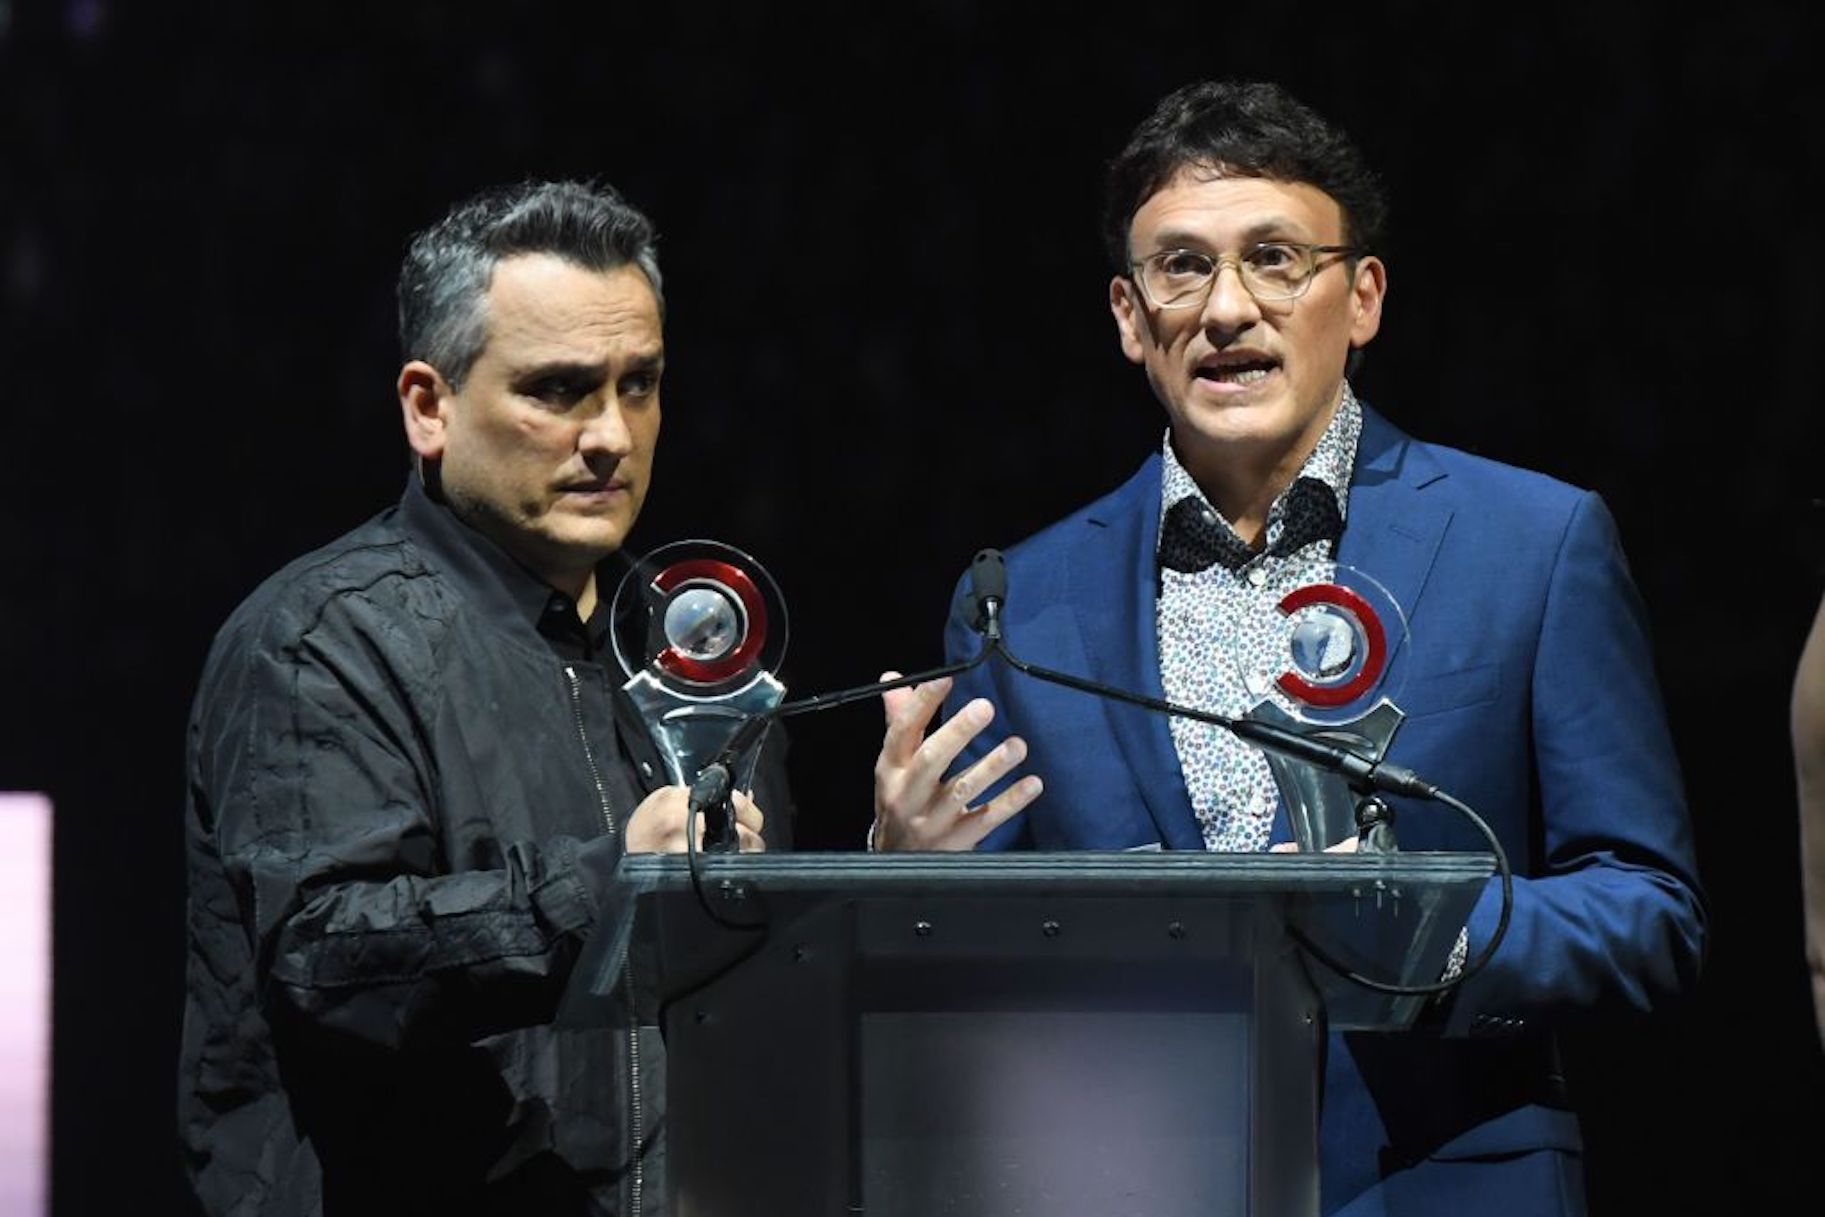 (L-R) Anthony Russo and Joe Russo